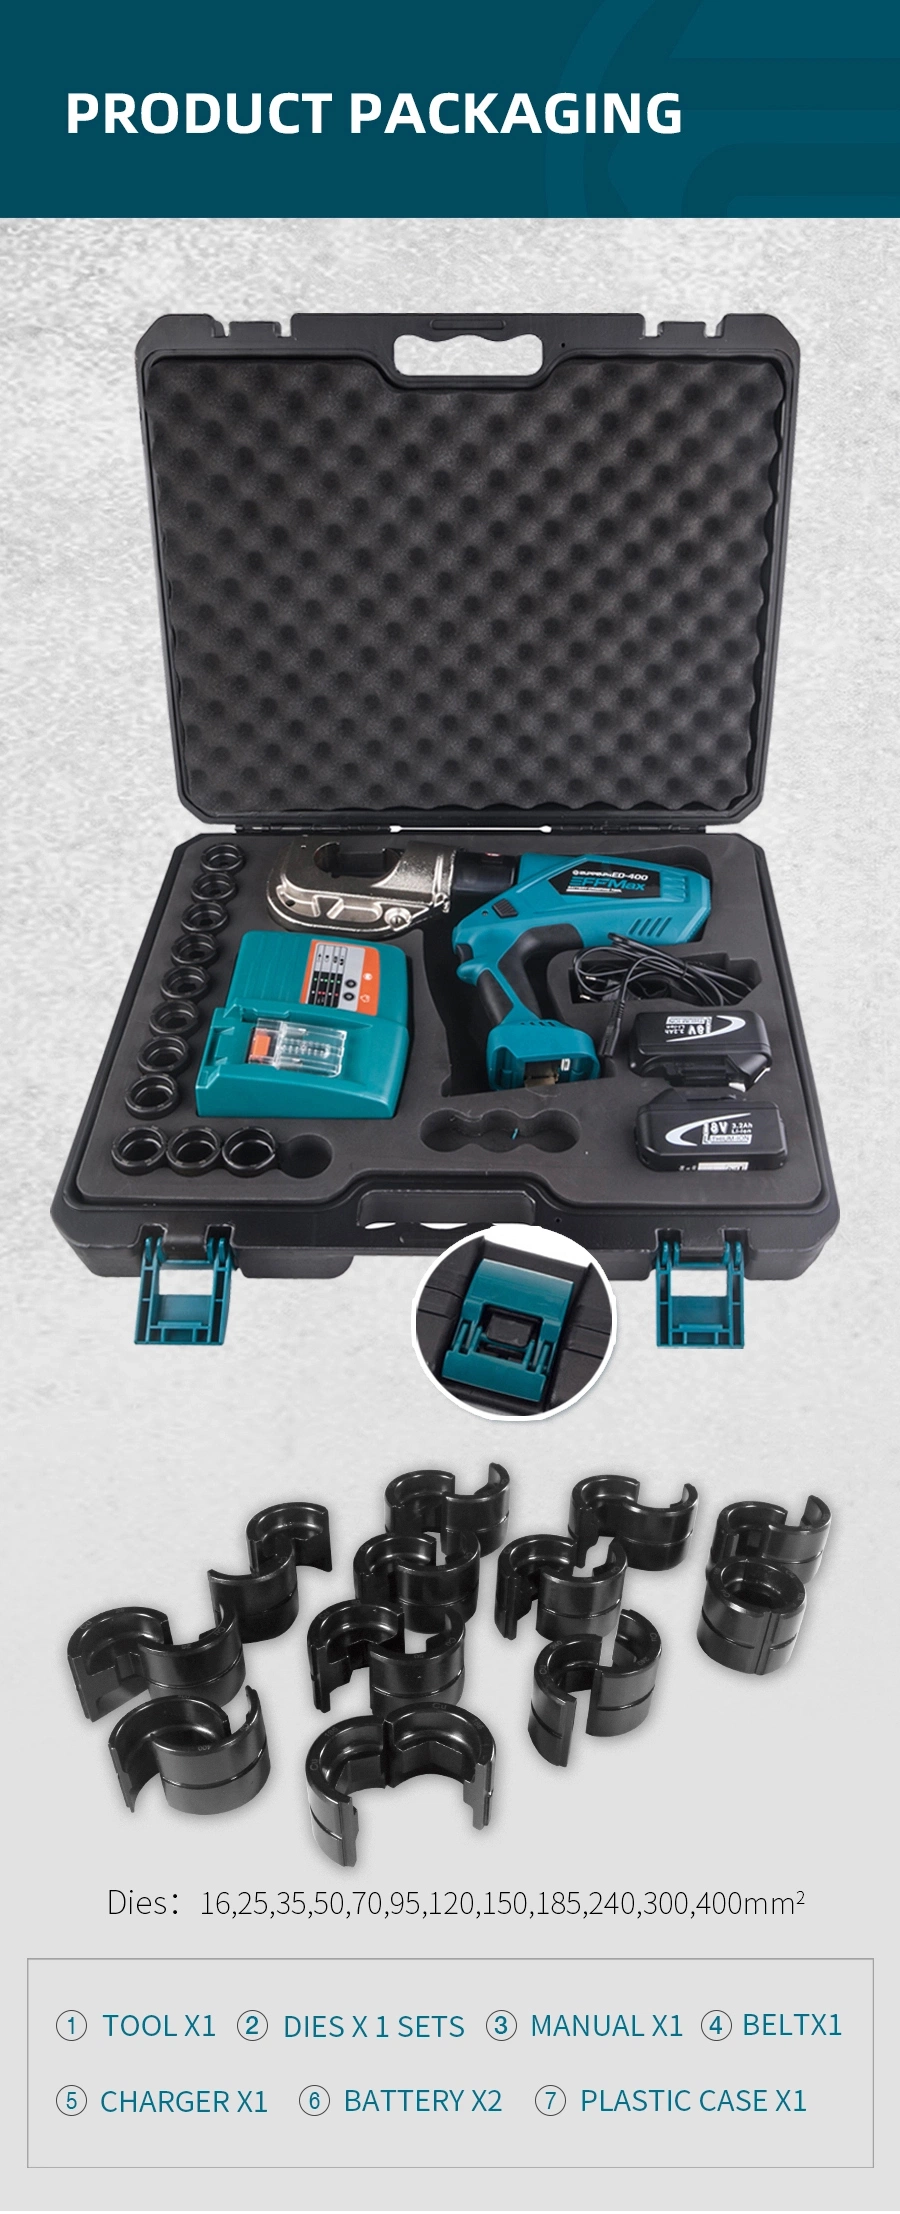 ED-400 Battery Powered Crimping Tool 16-400mm2